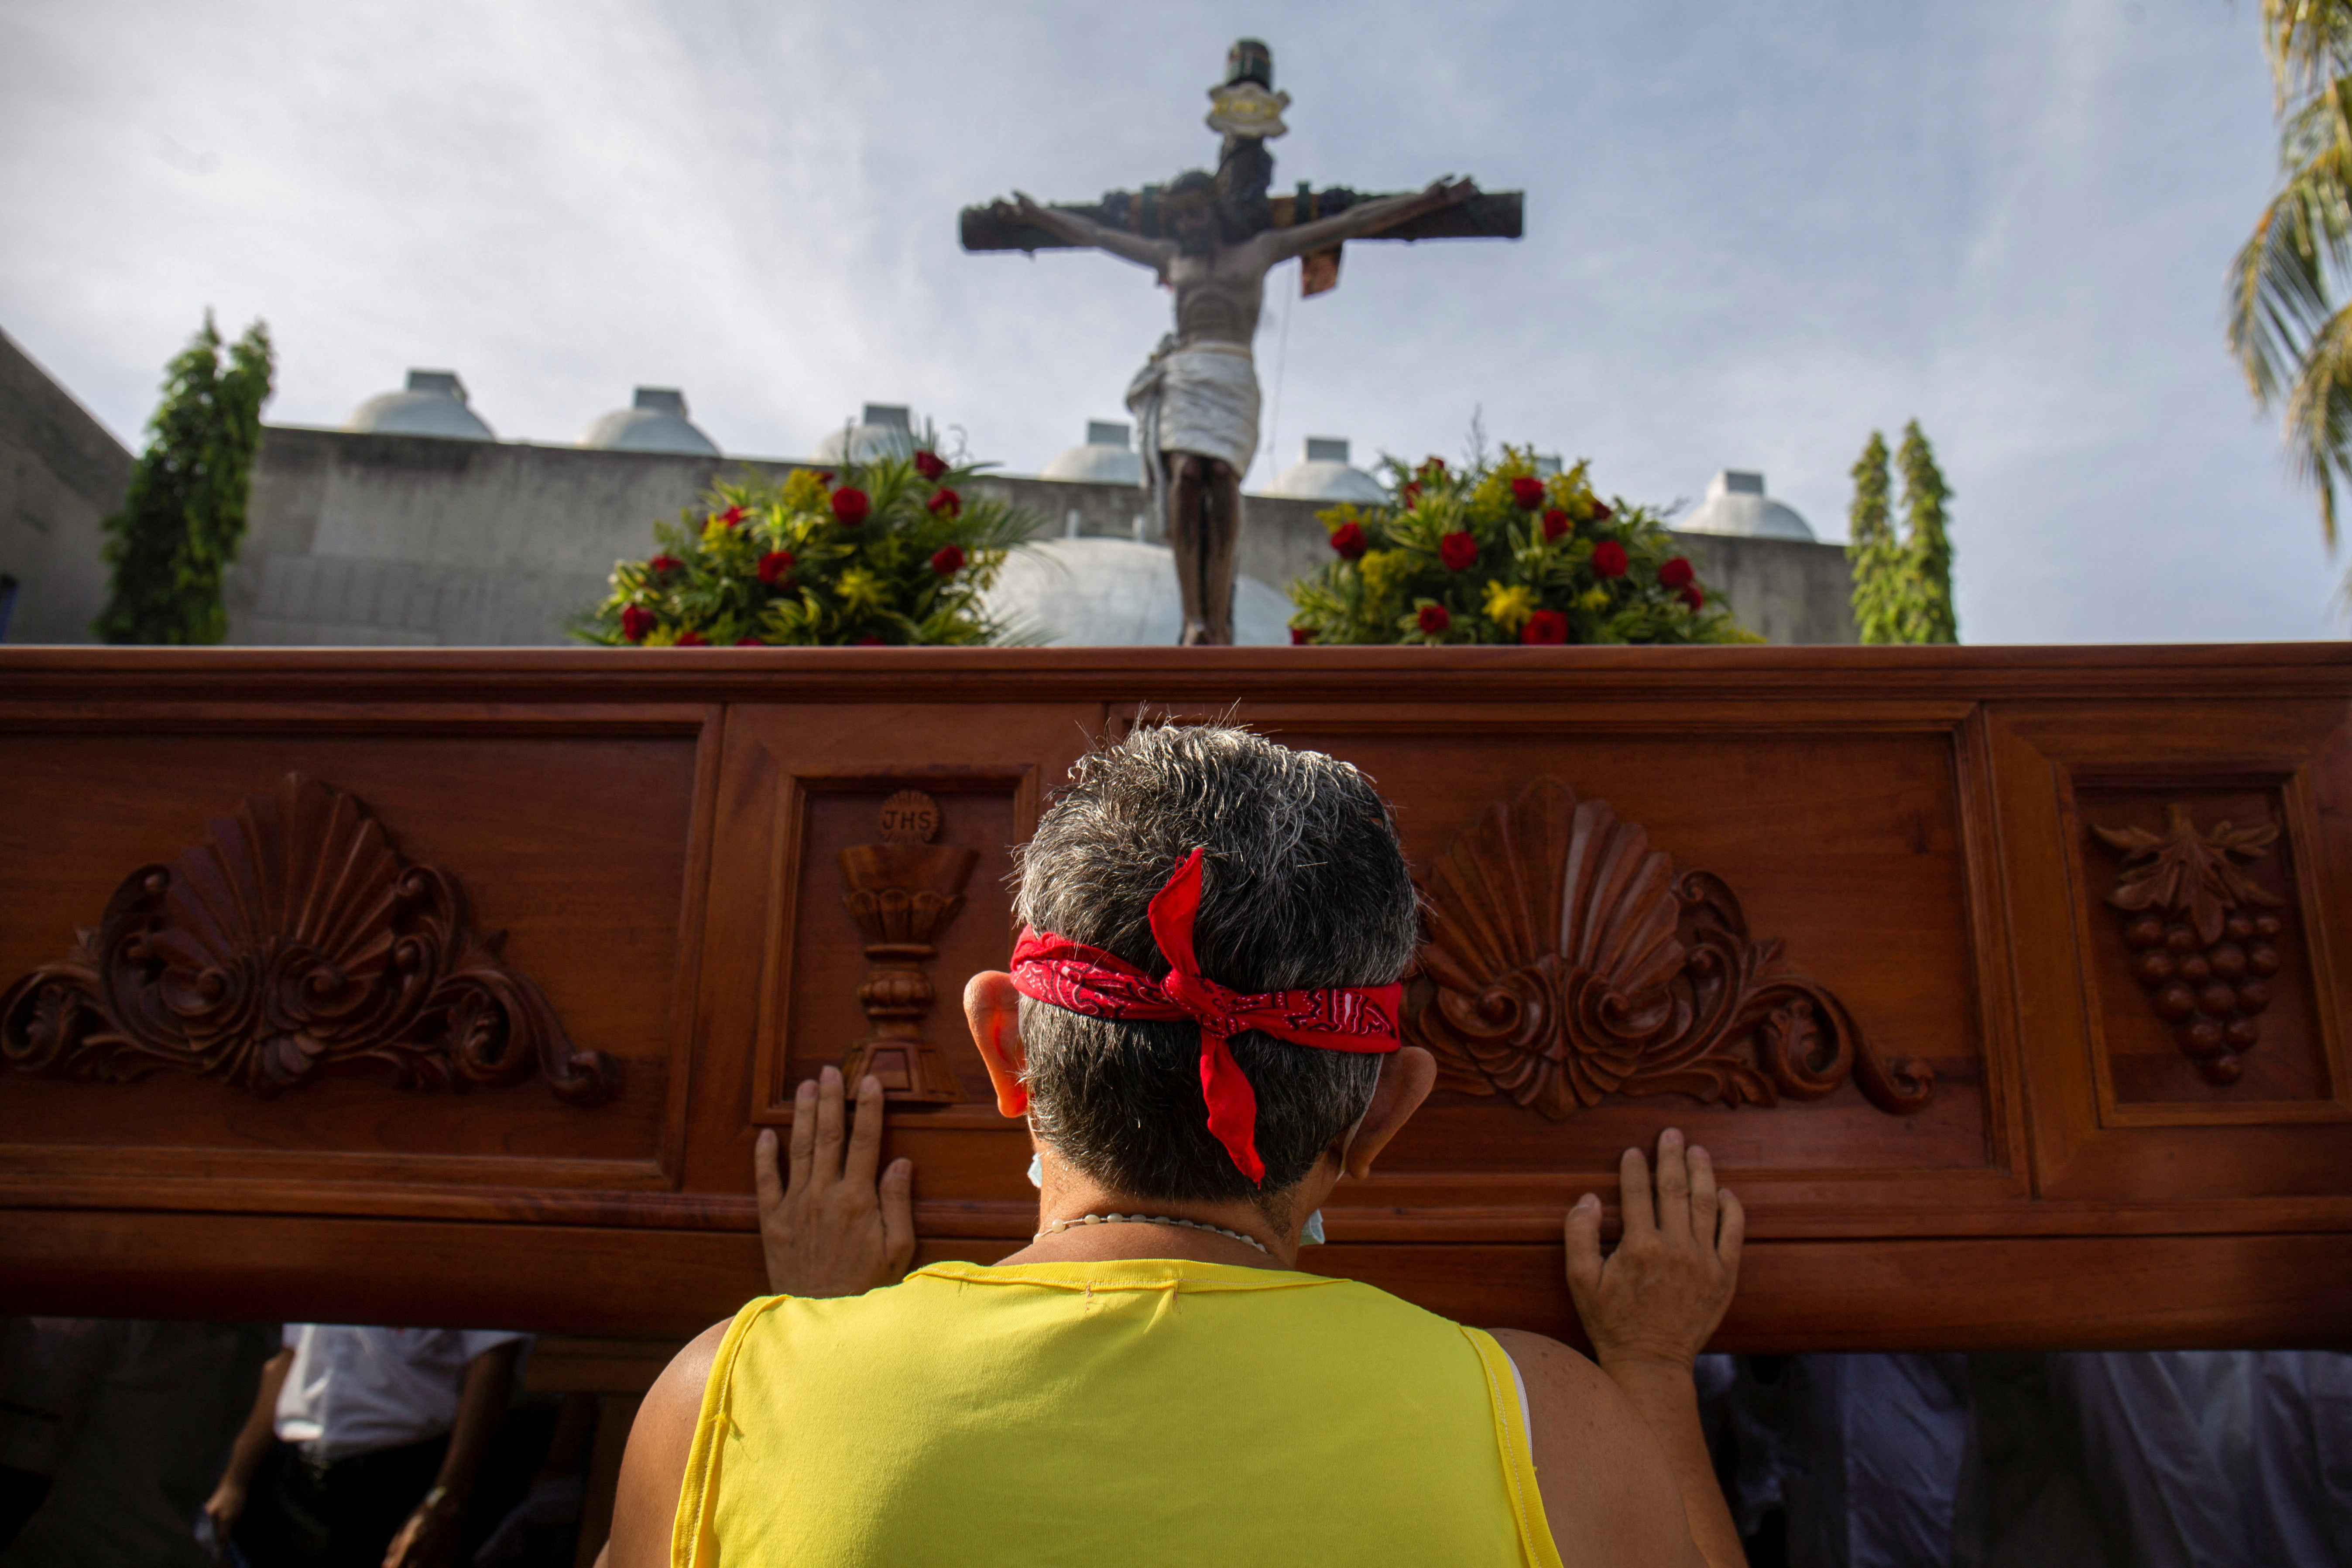 Nicaraguan bishops say they have not been invited to political